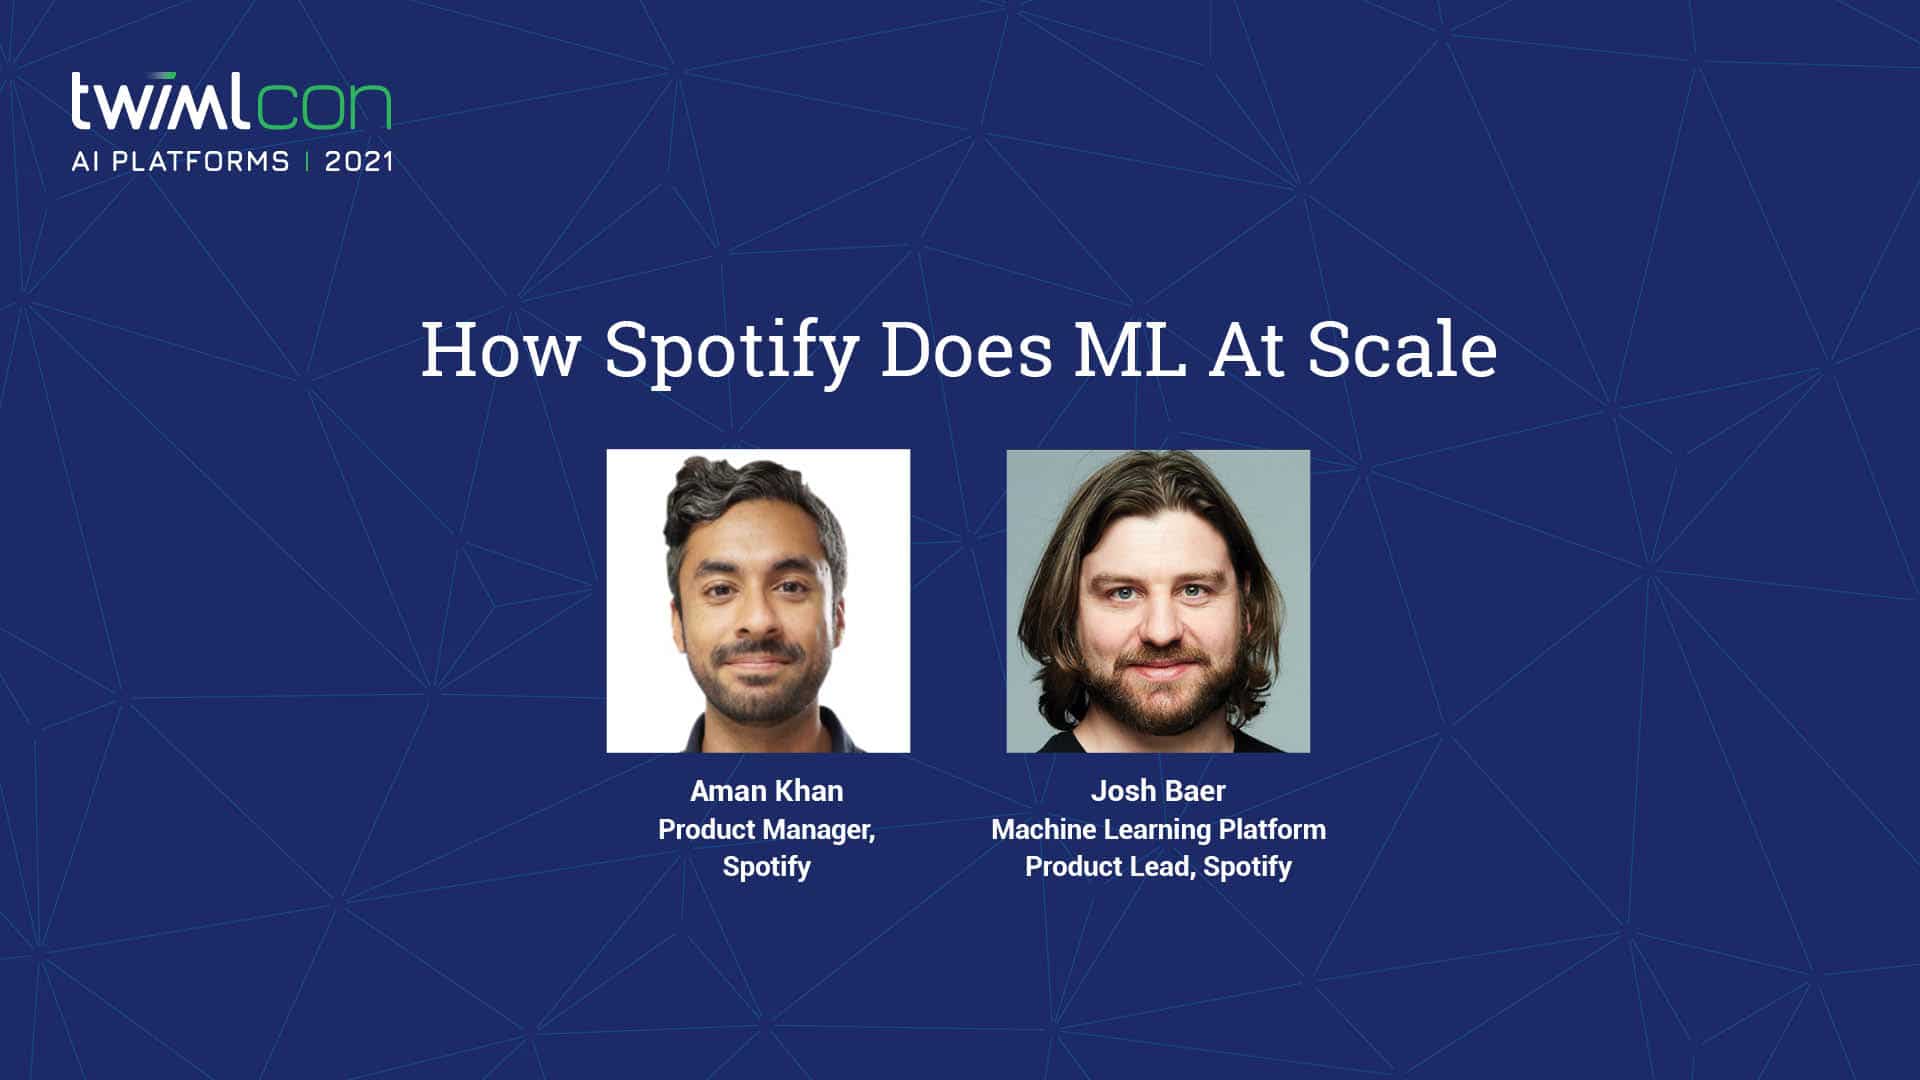 How Spotify Does ML At Scale